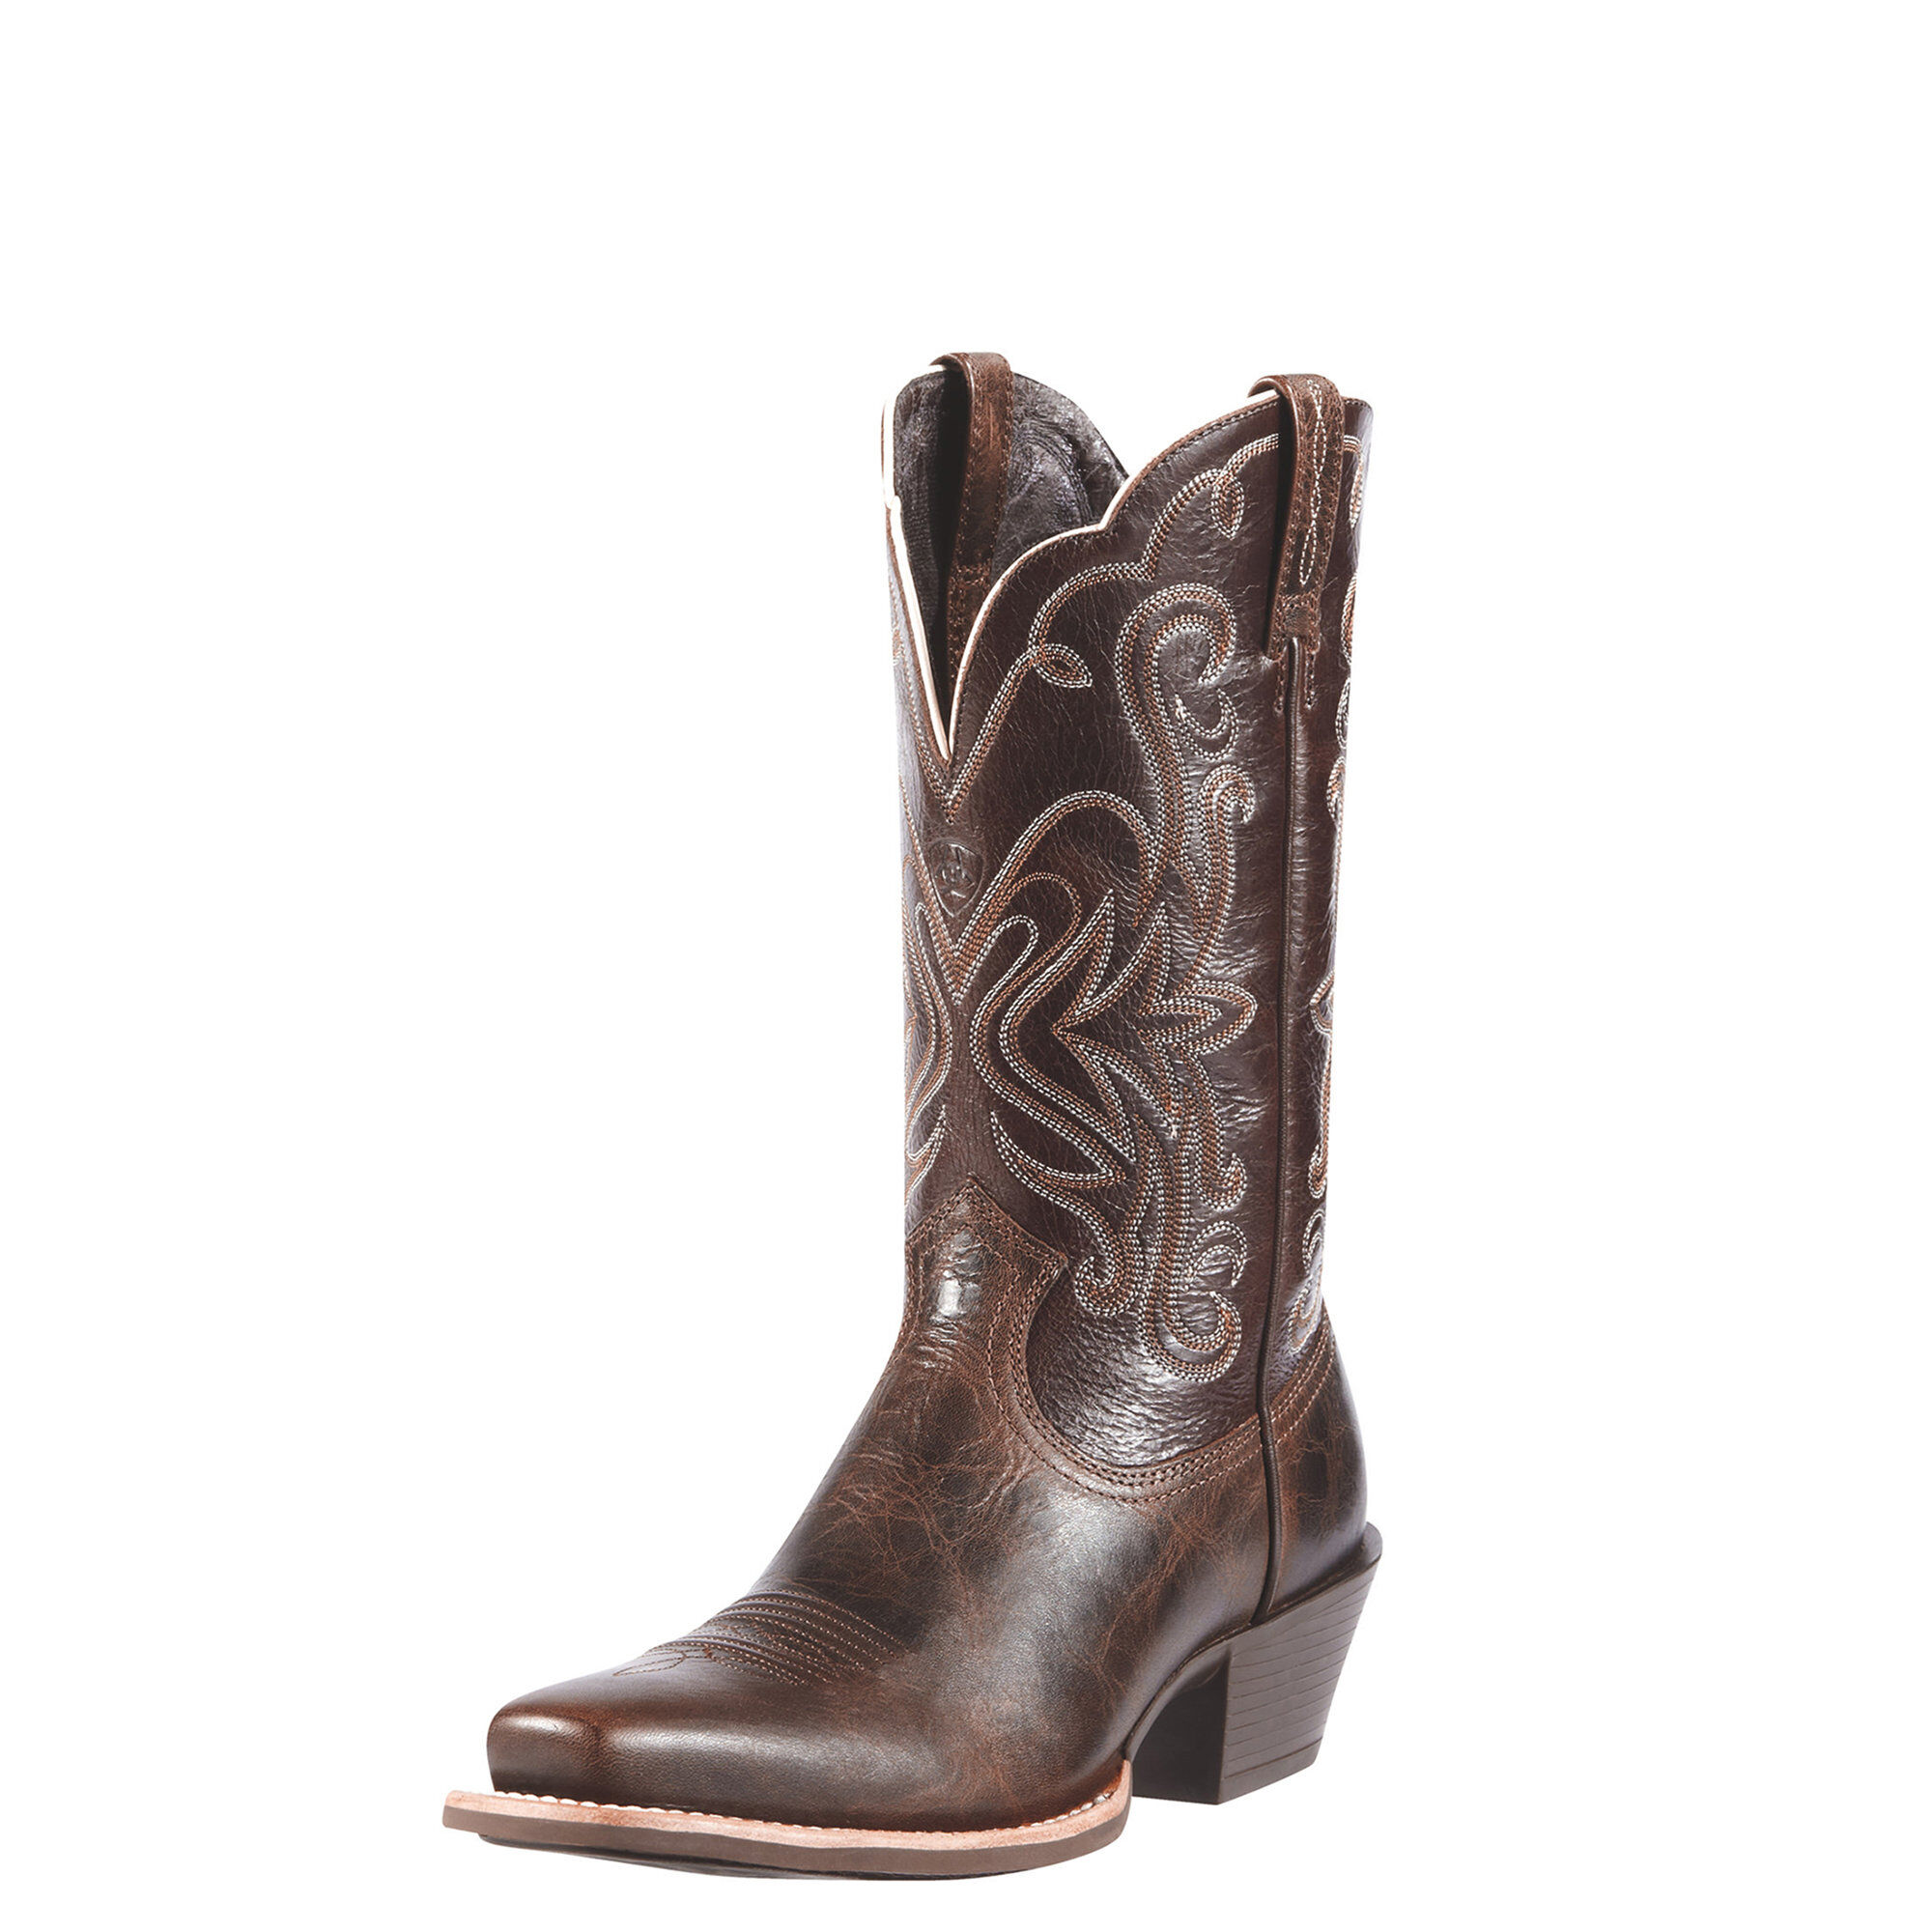 Women's Legend Western Boots in Chocolate Chip Leather  by Ariat